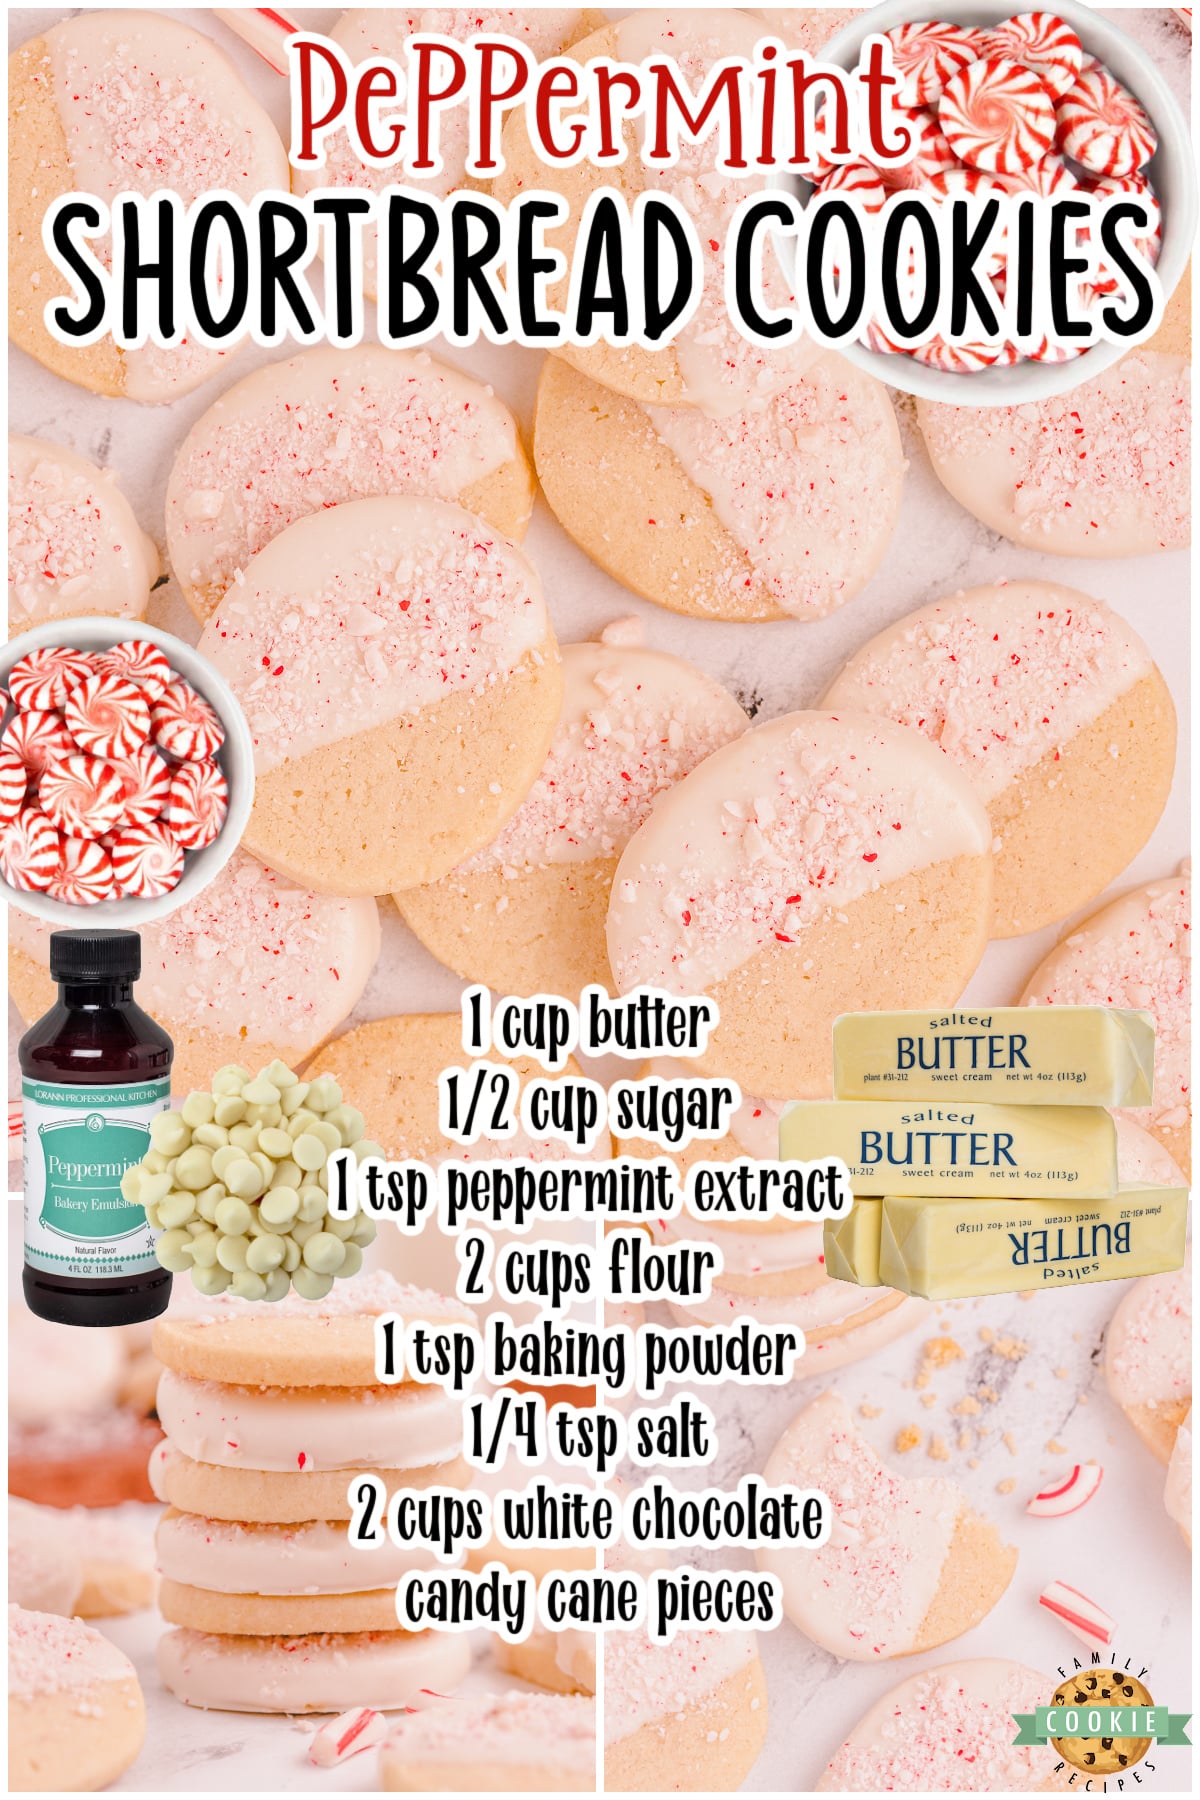 Peppermint shortbread cookies are festive buttery cookies topped with white chocolate & candy cane pieces! Shortbread cookies perfect for Christmas!